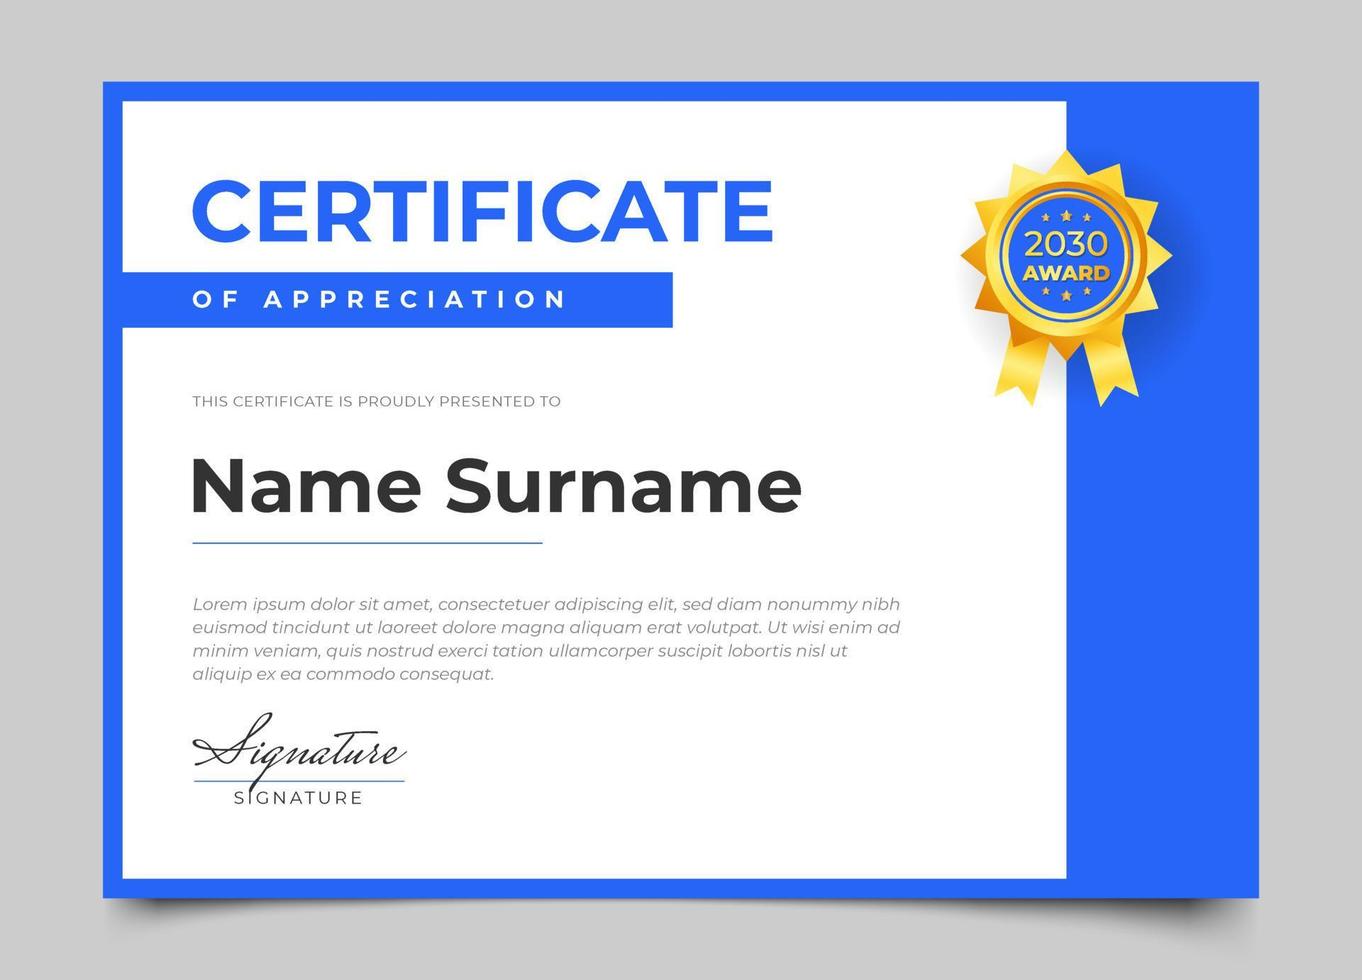 modern certificate design with blue color and modern minimalist style vector